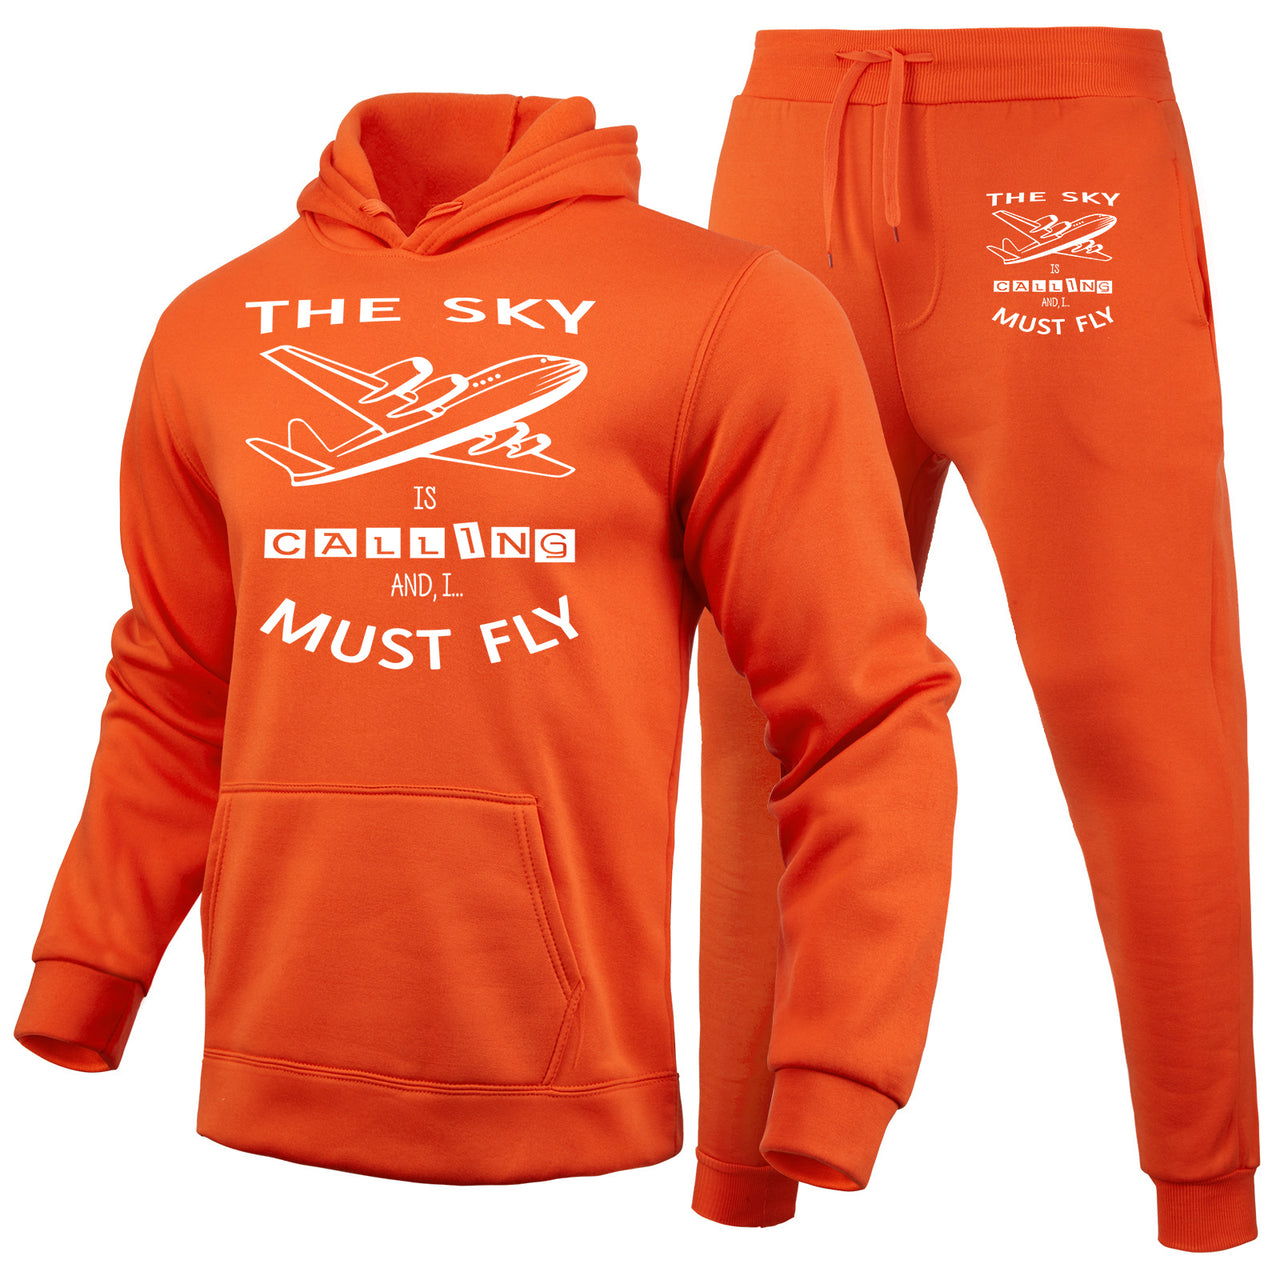 The Sky is Calling and I Must Fly Designed Hoodies & Sweatpants Set